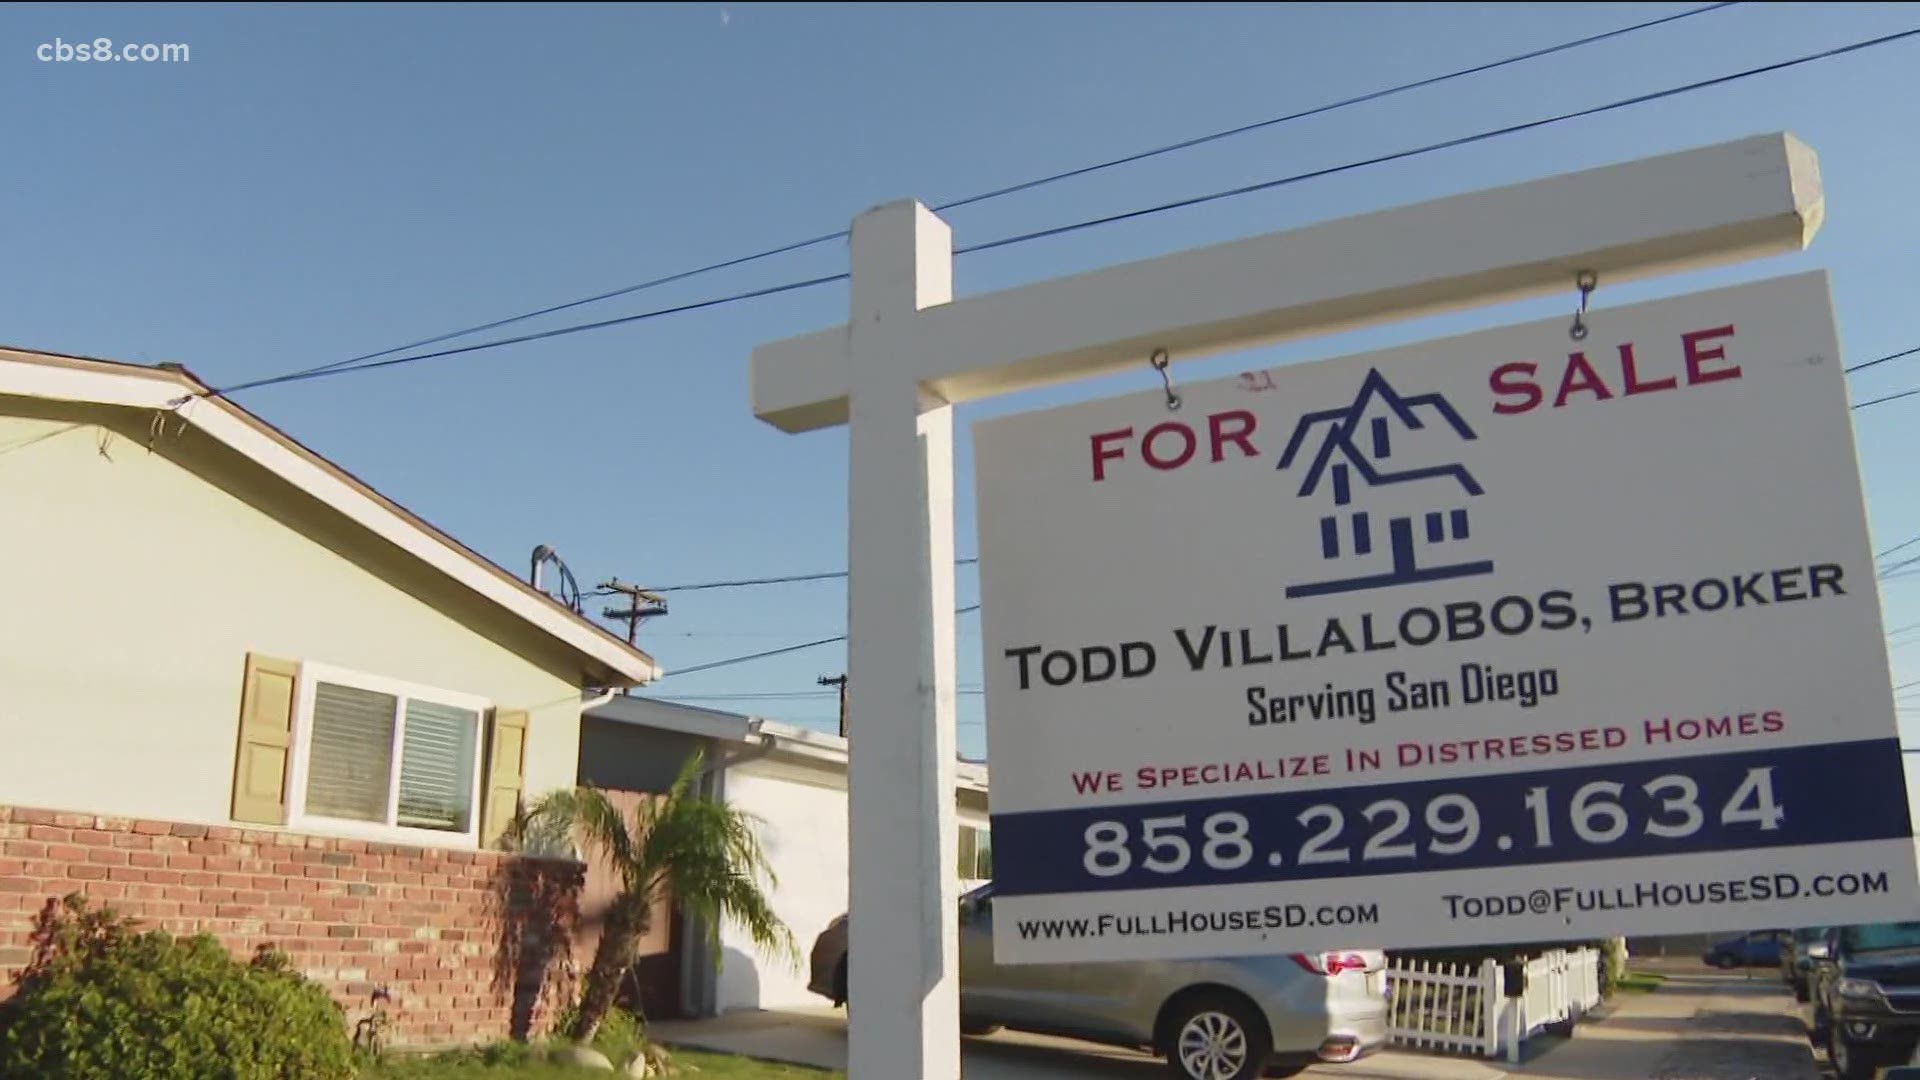 News 8's Kelley Hessedal spoke to a San Diego realtor who said there is still a lot of uncertainty.